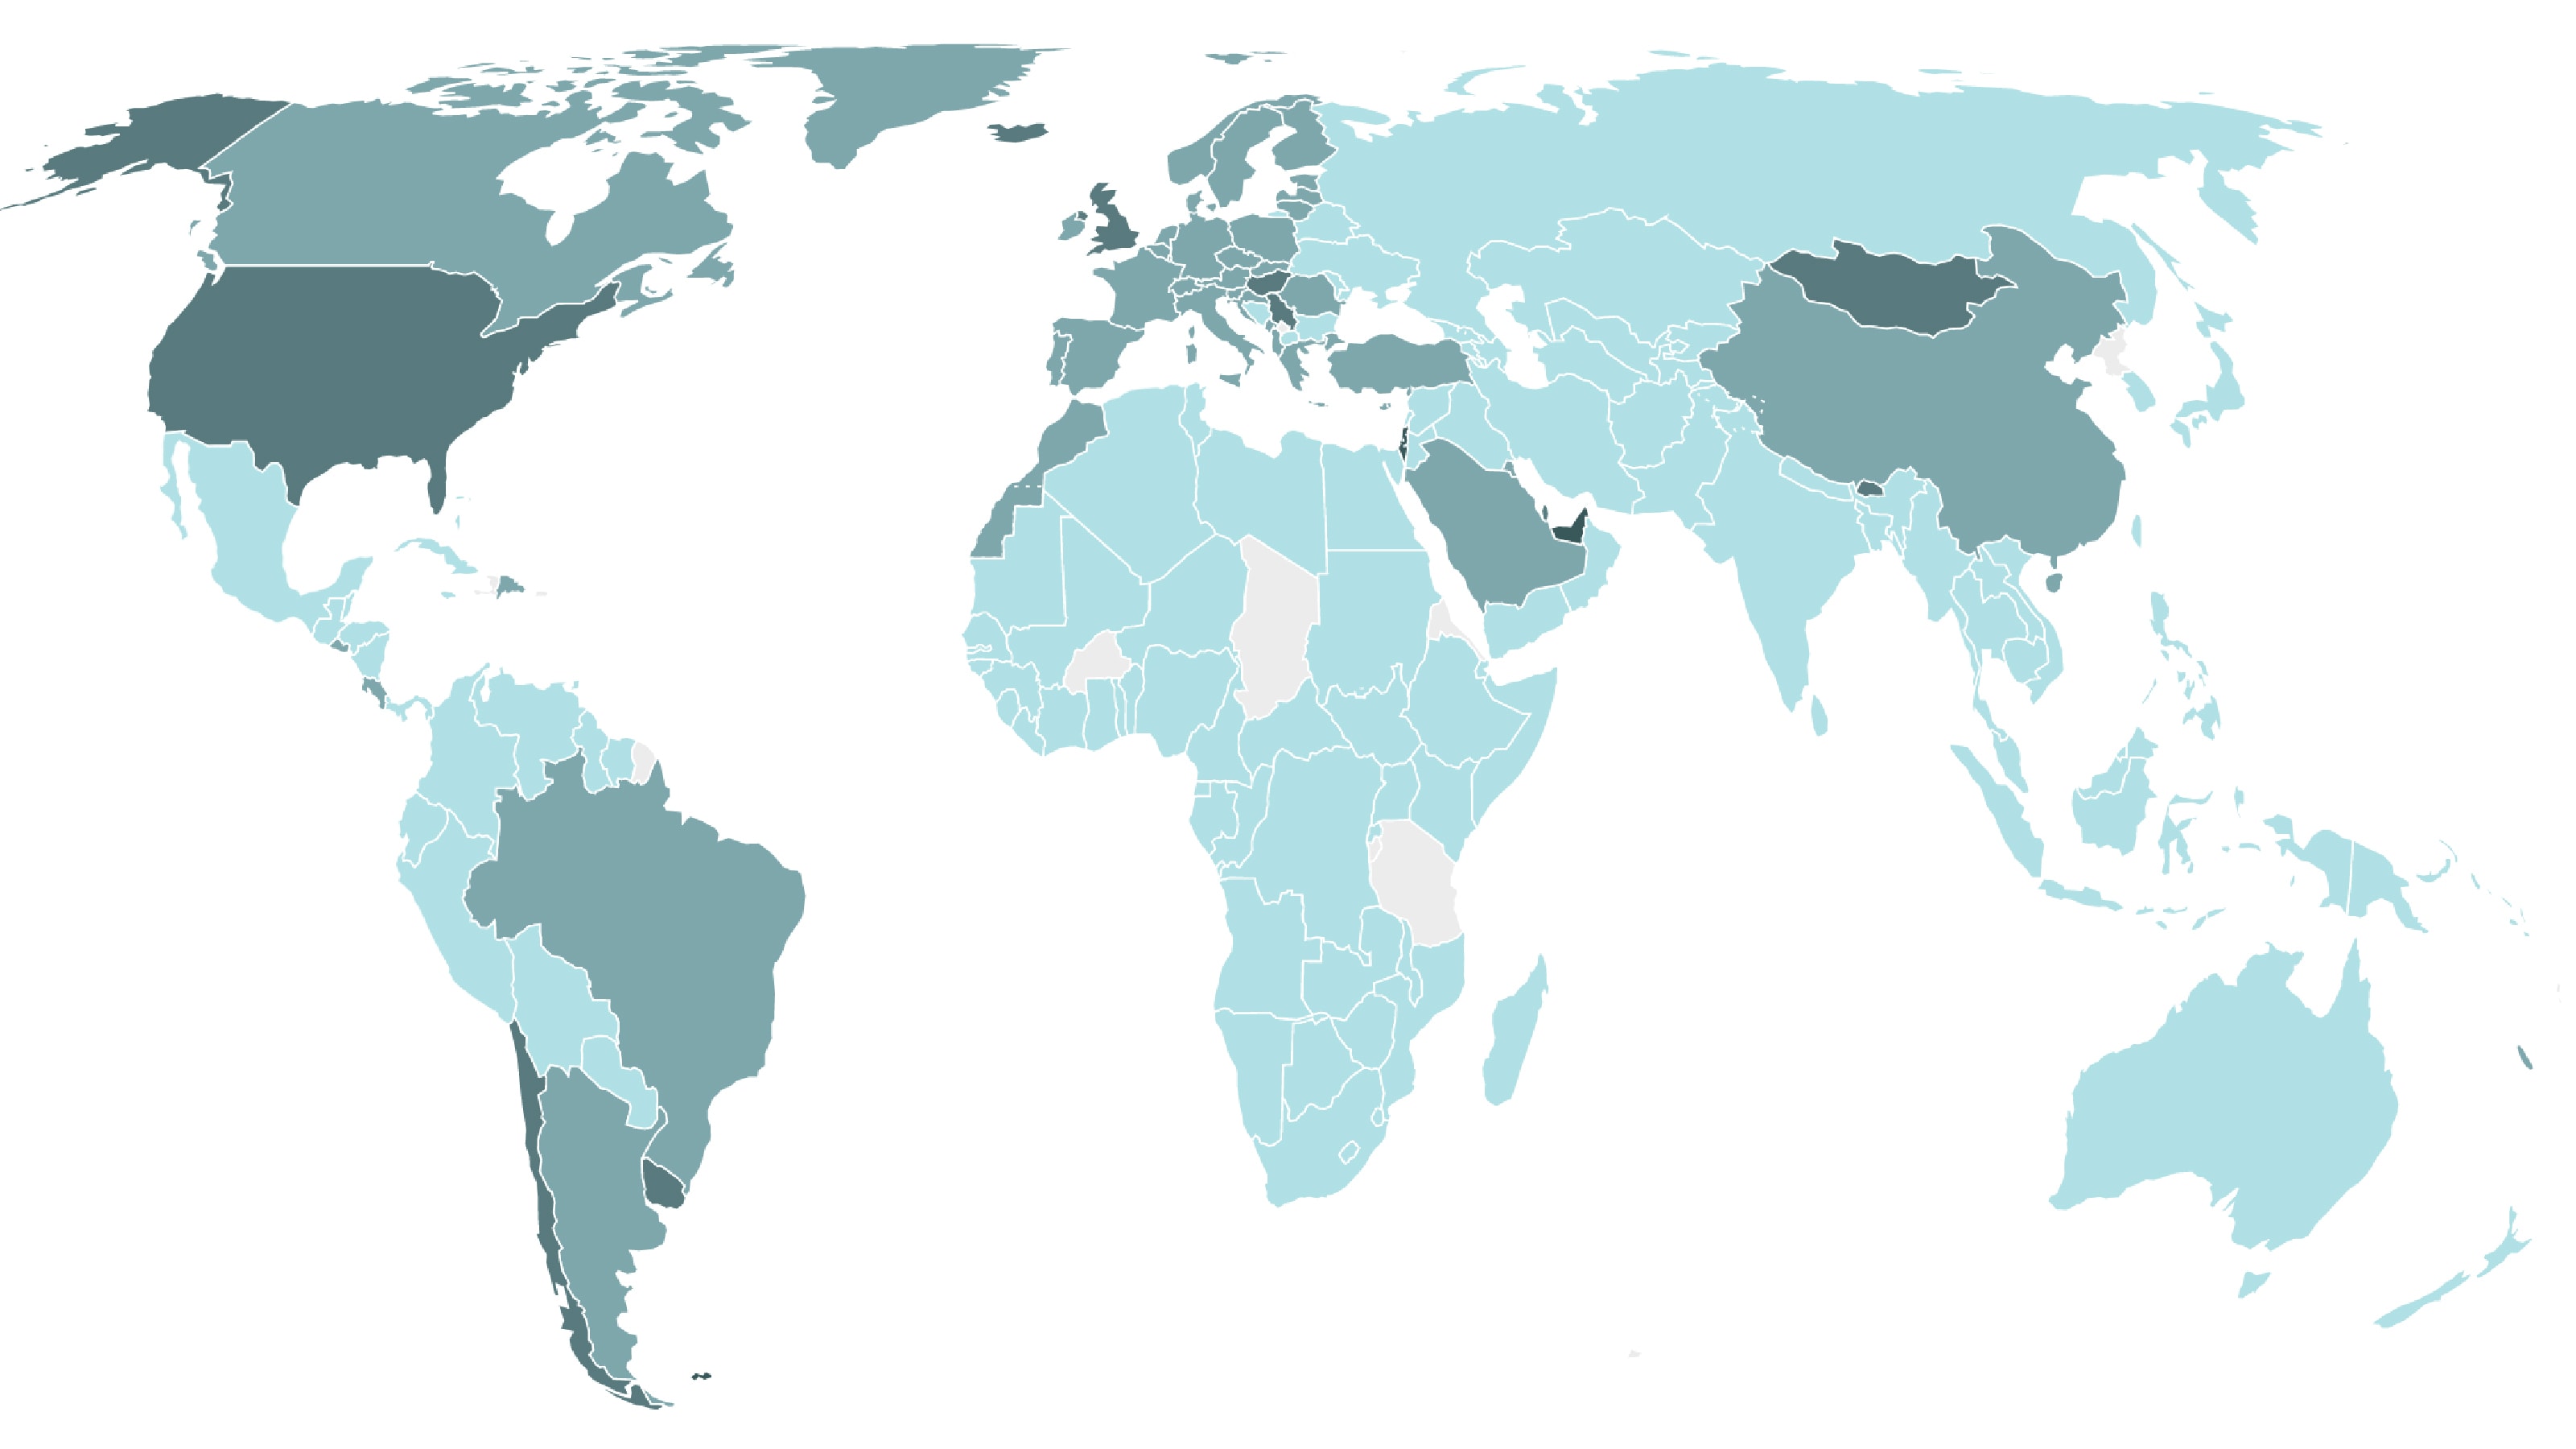 Covid-19 vaccine tracker: View vaccinations by country